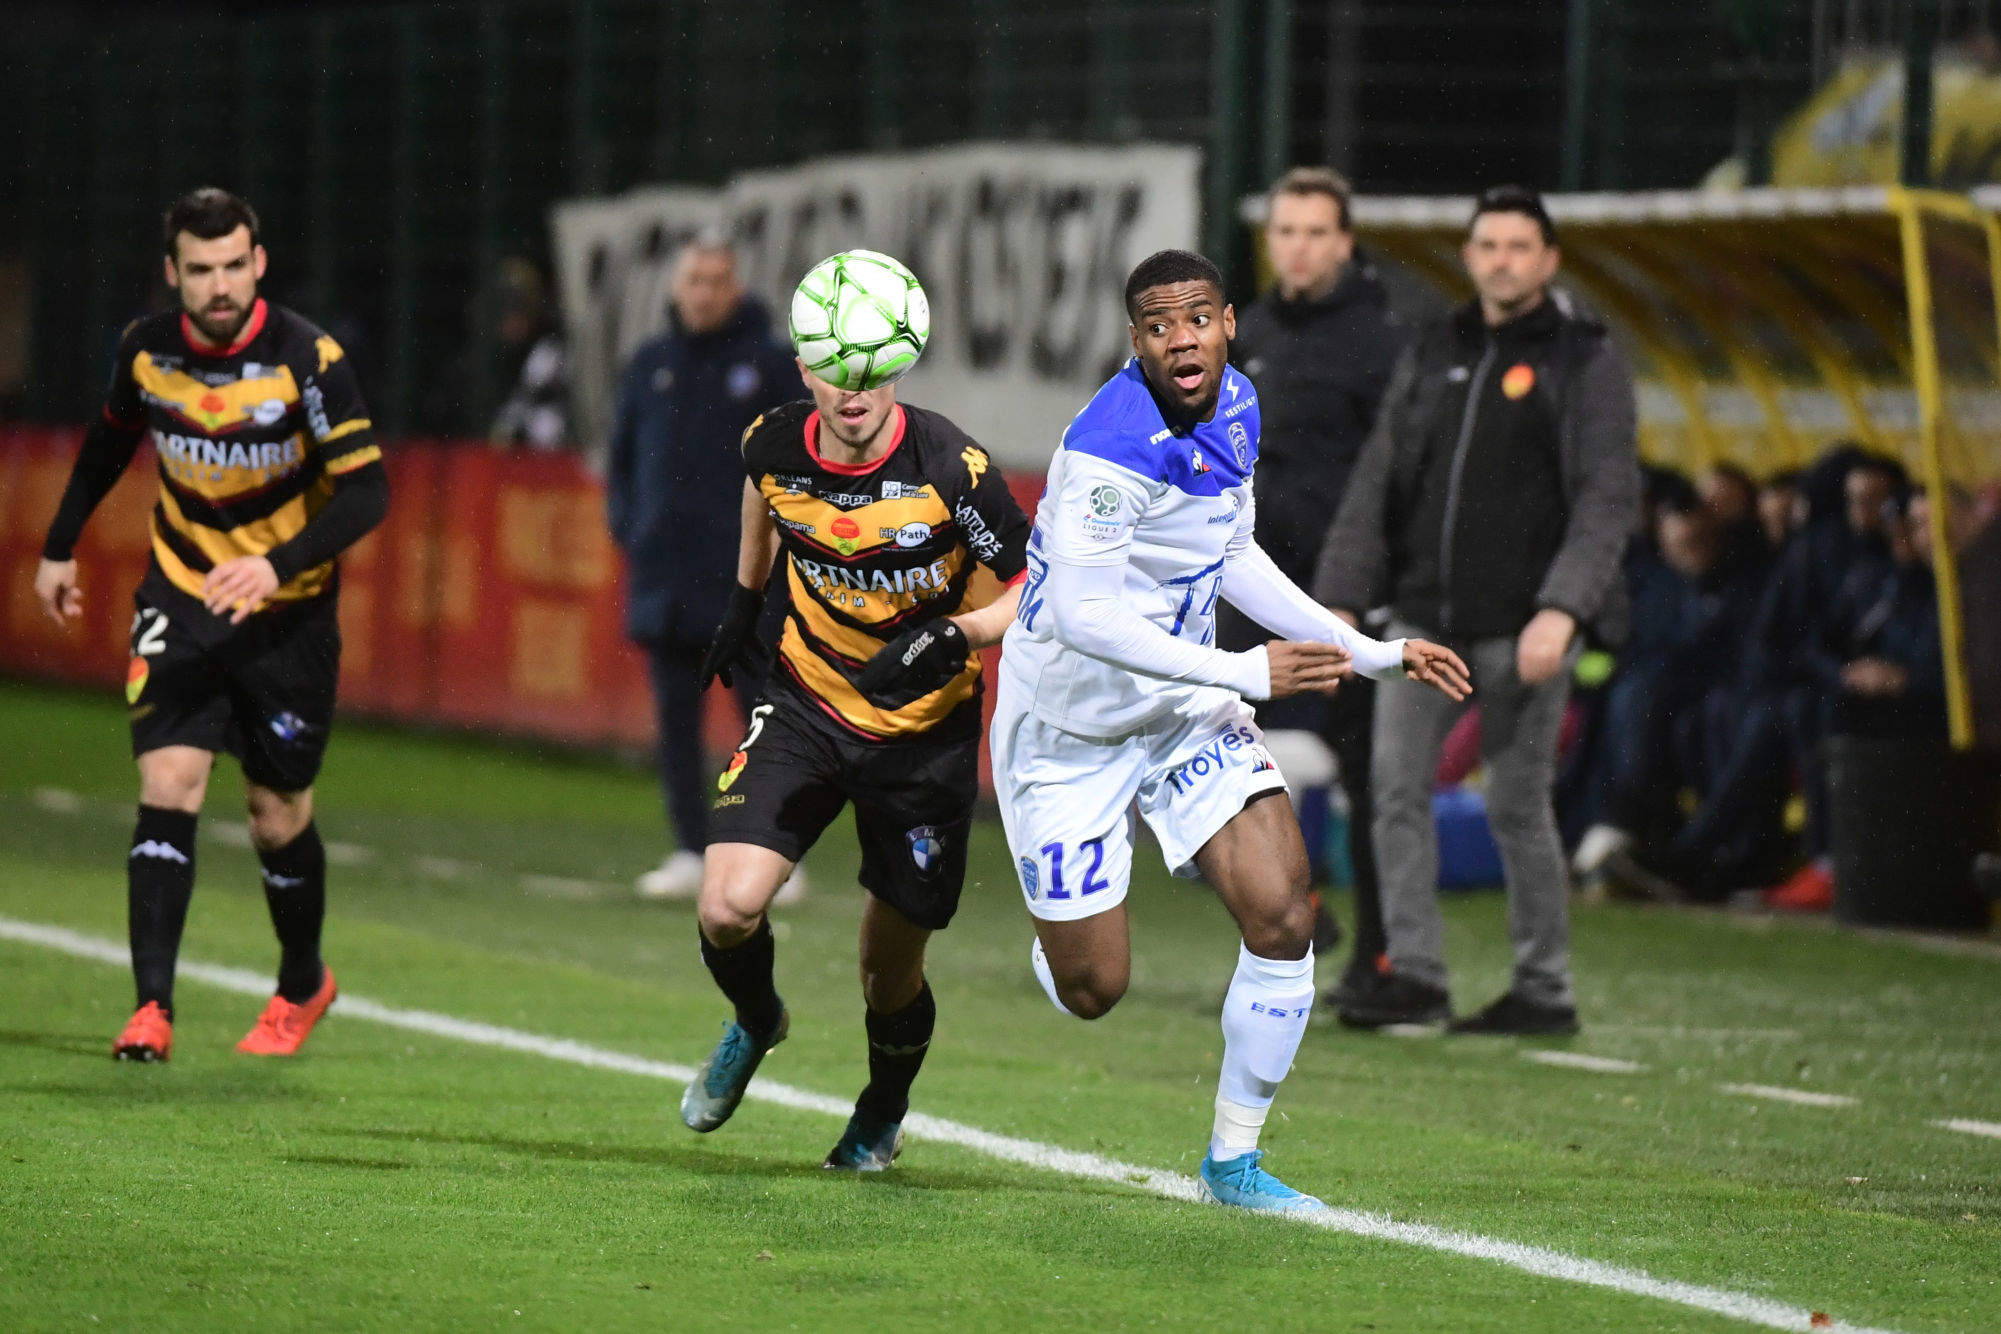 (R-L) Warren TCHIMBEMBE of Troyes and Maxime D'ARPINO of Orleans during the Ligue 2 match between Orleans and Troyes on February 28, 2020 in Orleans, France. (Photo by Dave Winter/Icon Sport) - Stade de la Source - Orleans (France)